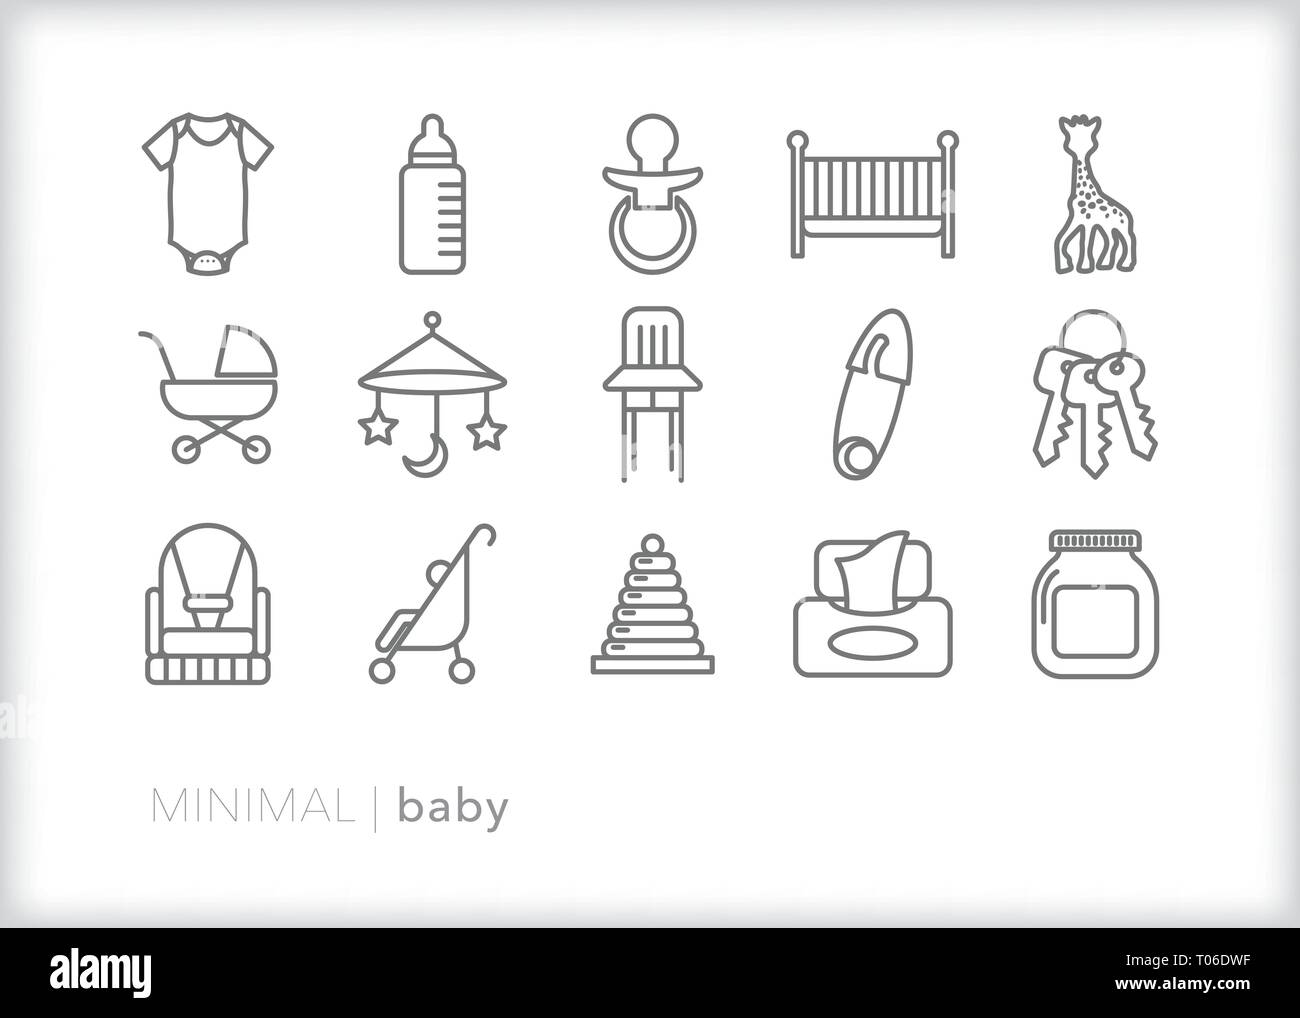 Set of 15 baby line icons of newborn, infant and child items for feeding, cleaning, playing and safety Stock Vector